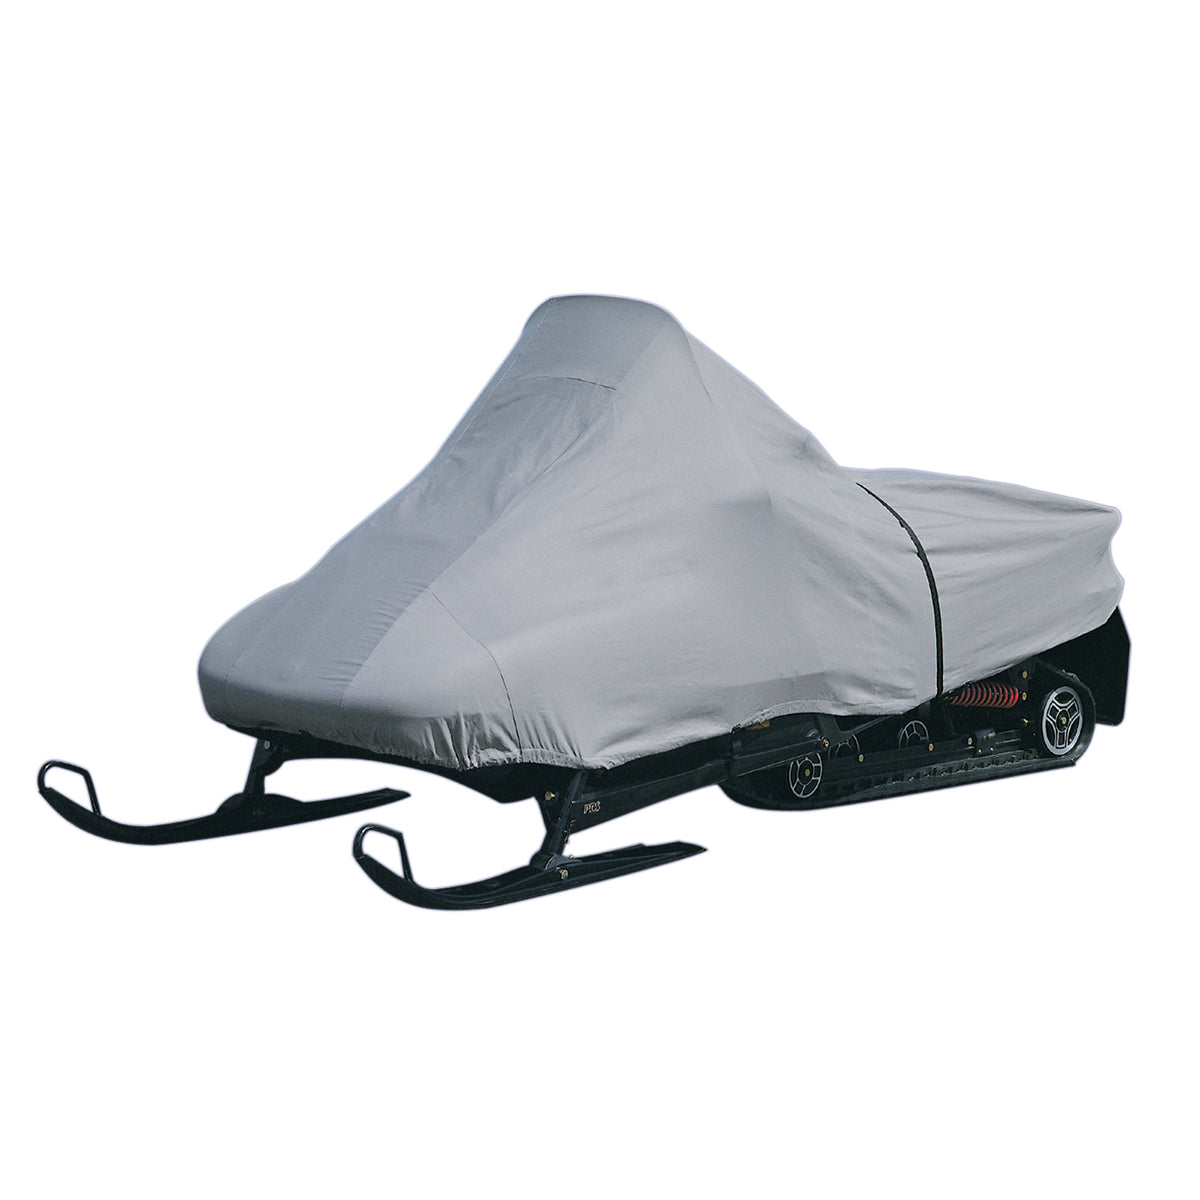 Classic Accessories 71527 Snowmobile Travel Cover for Snowmobiles Up to 100"